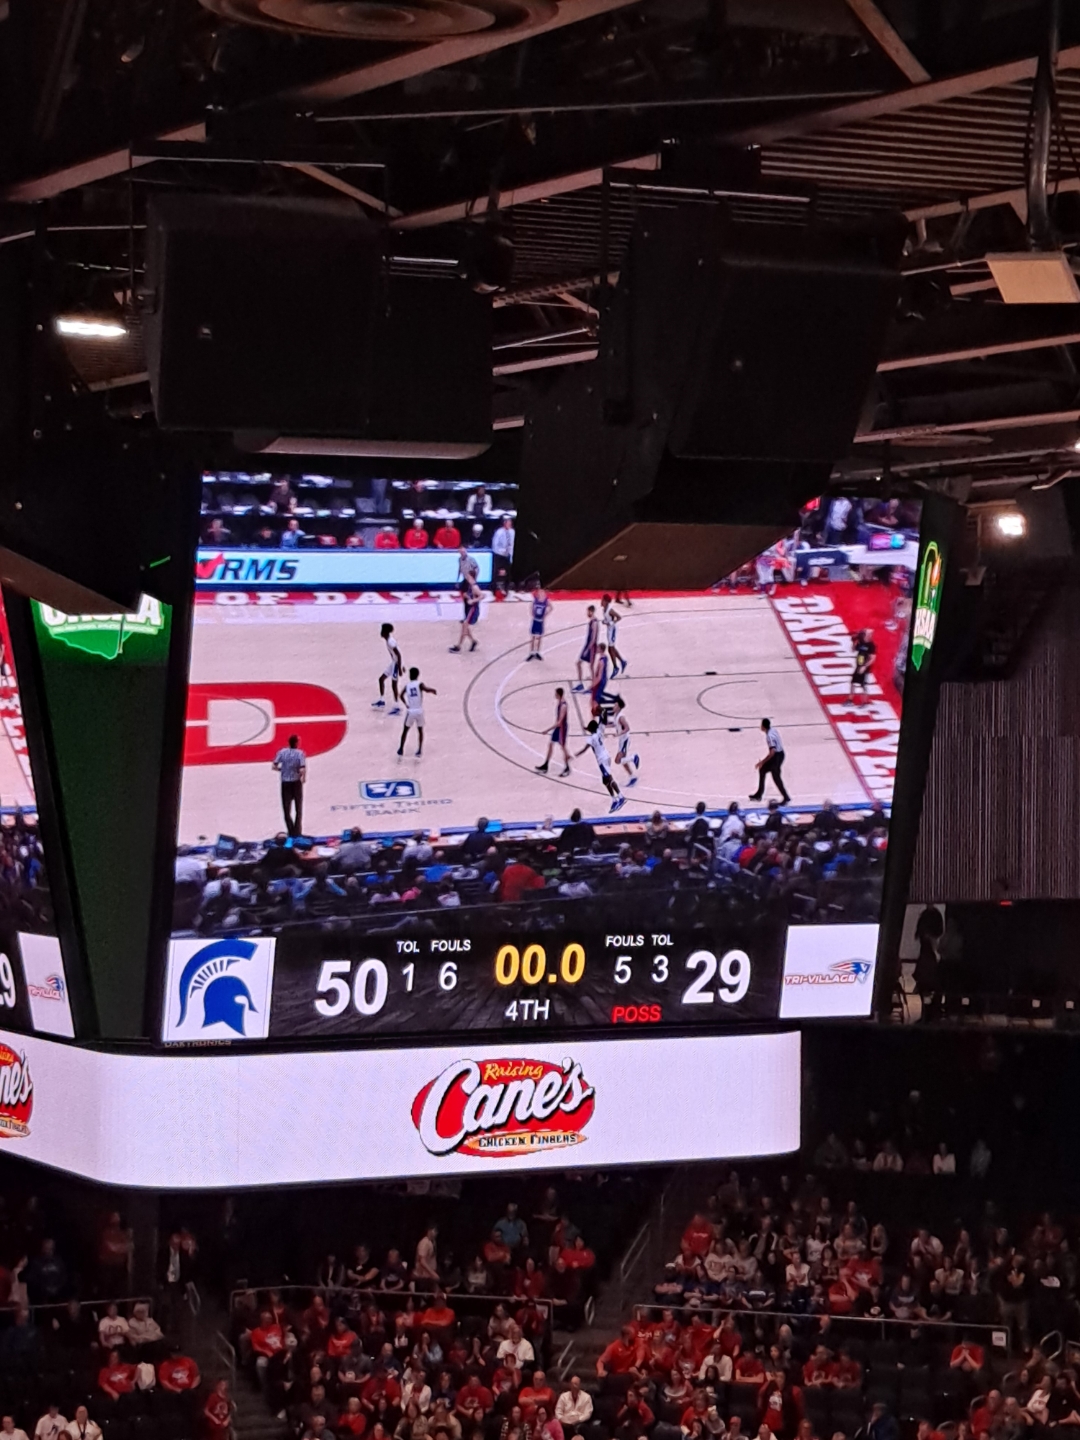 photo of jumbotron fo spartan basketball team winning the game includes score 50-29